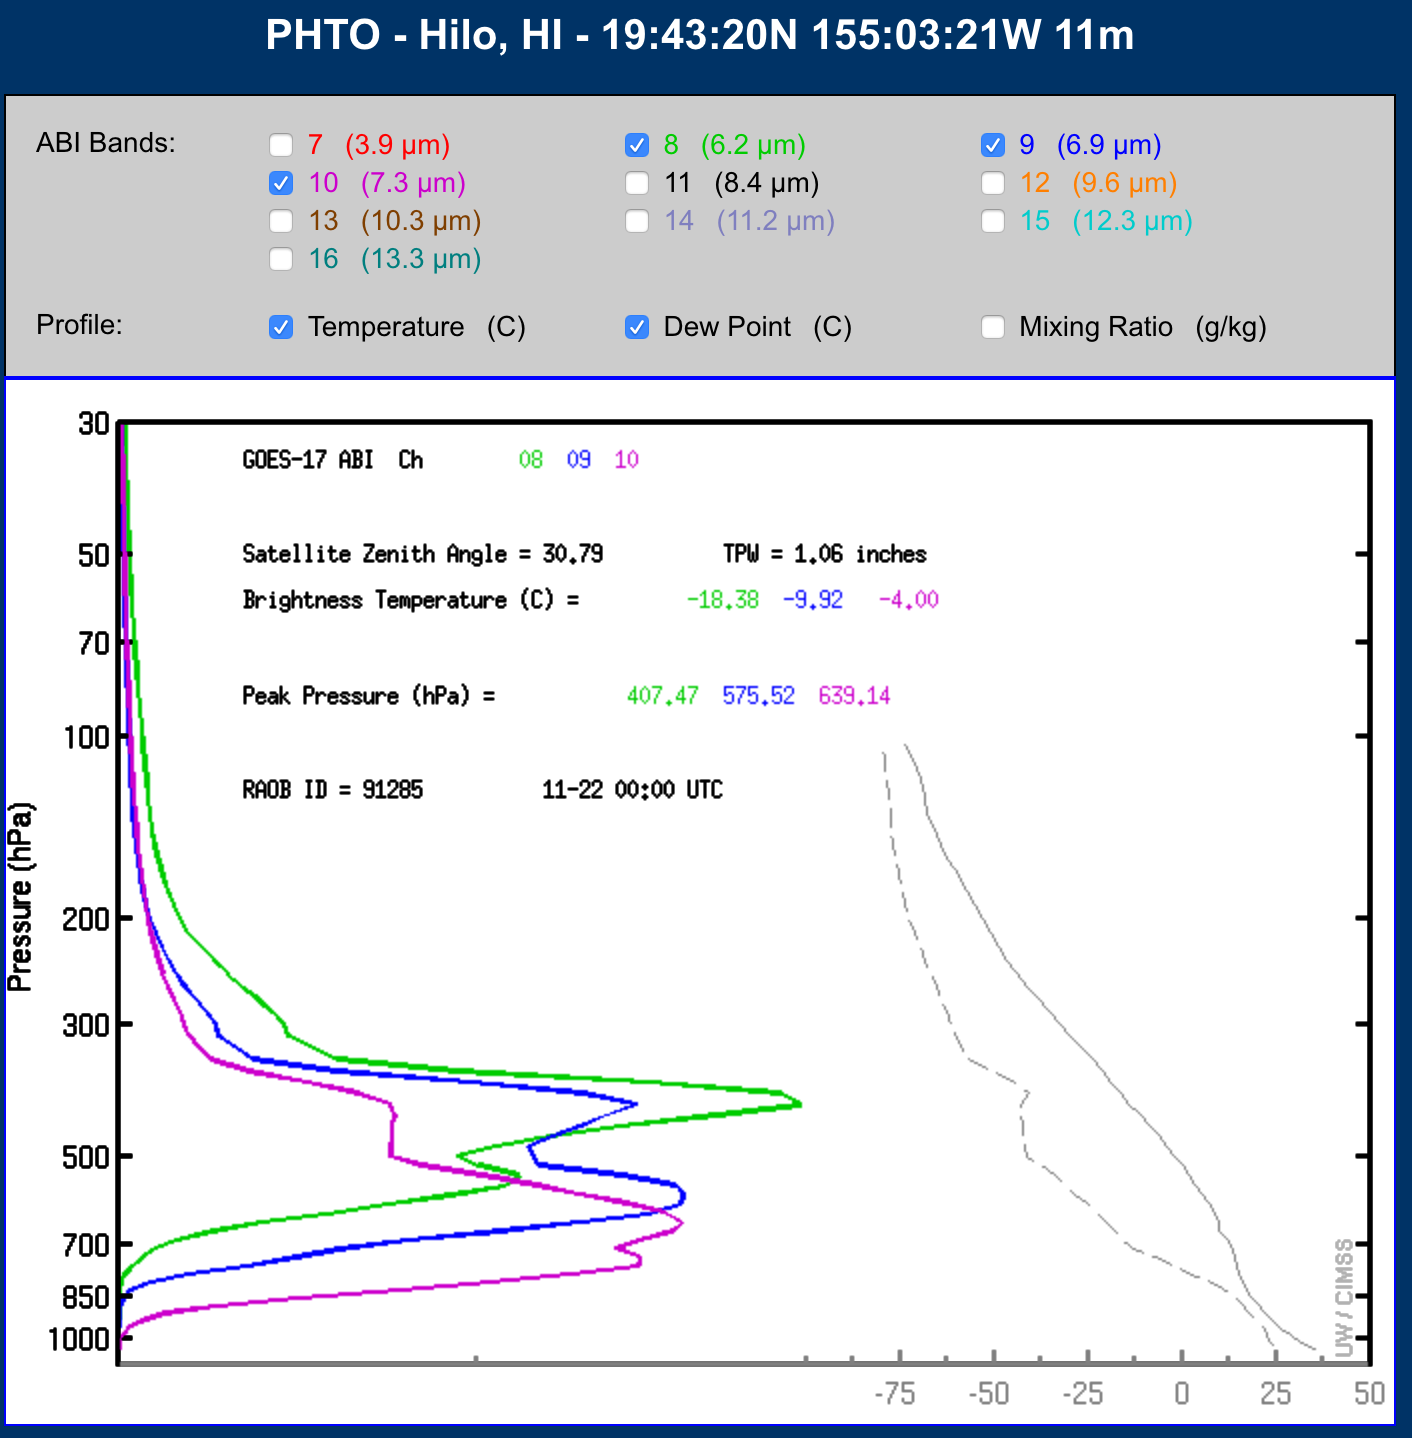 Plots of weighting functions for the 3 ABI Water Vapor bands, calculated from 00 UTC rawinsonde data from Hilo PHTO [click to enlarge]